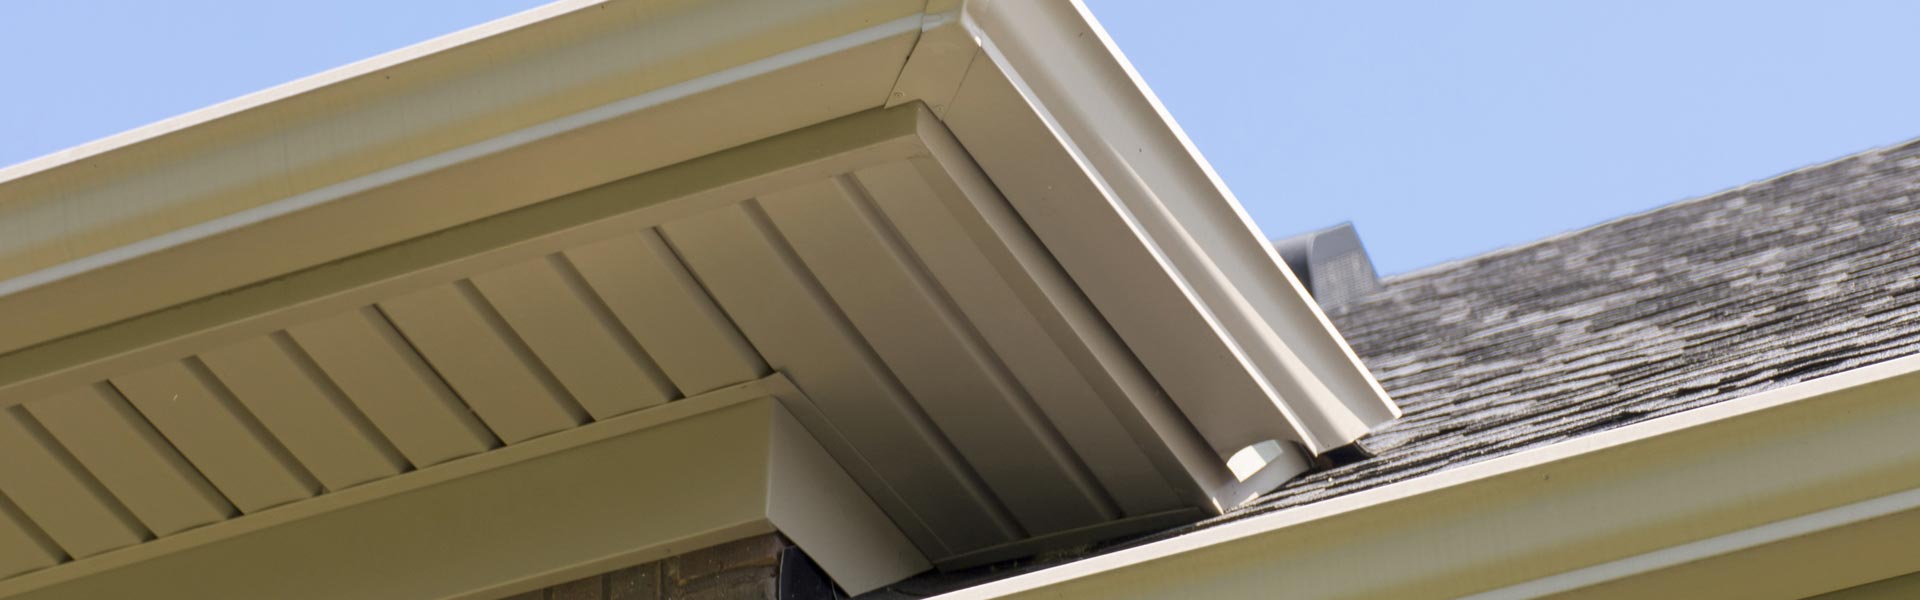 Angle Roofing & Gutter Company Images